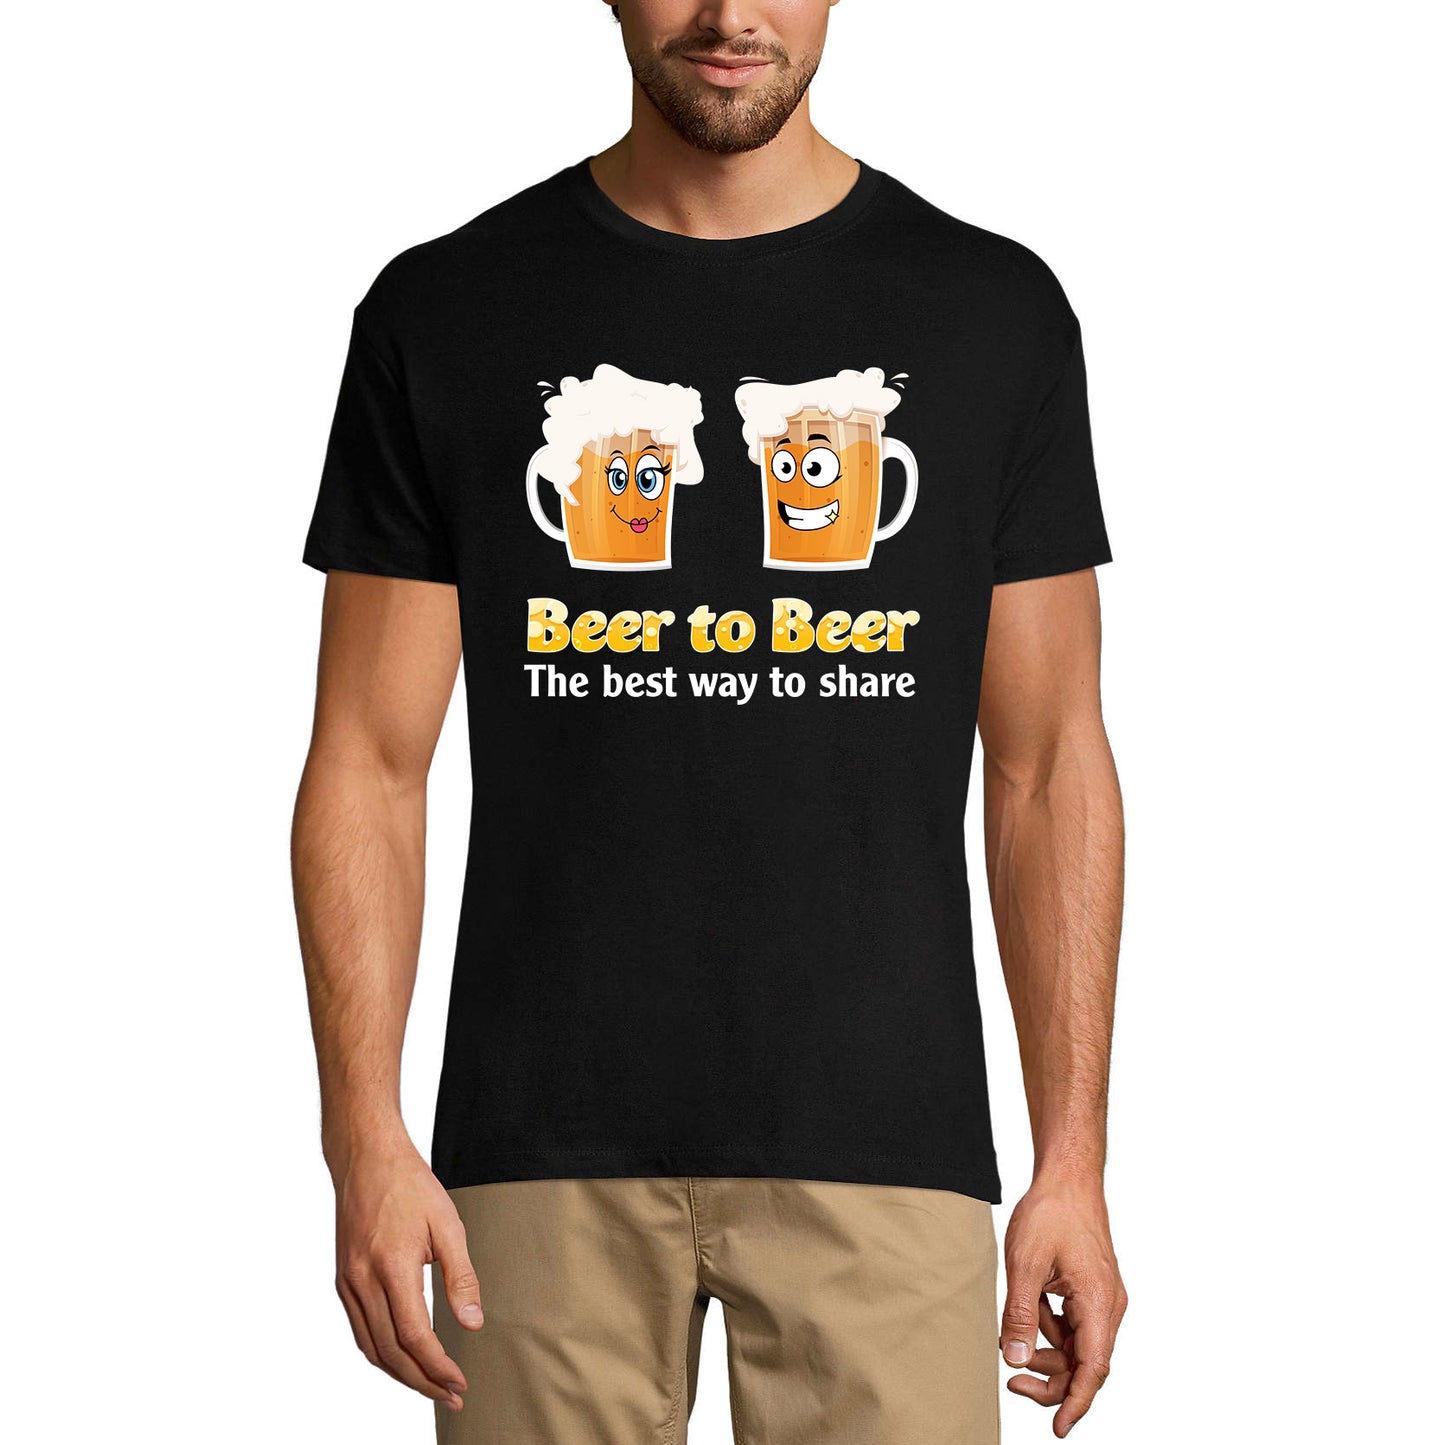 ULTRABASIC Men's T-Shirt Beer to Beer Best Way to Share - Funny Alcohol Lover Tee Shirt